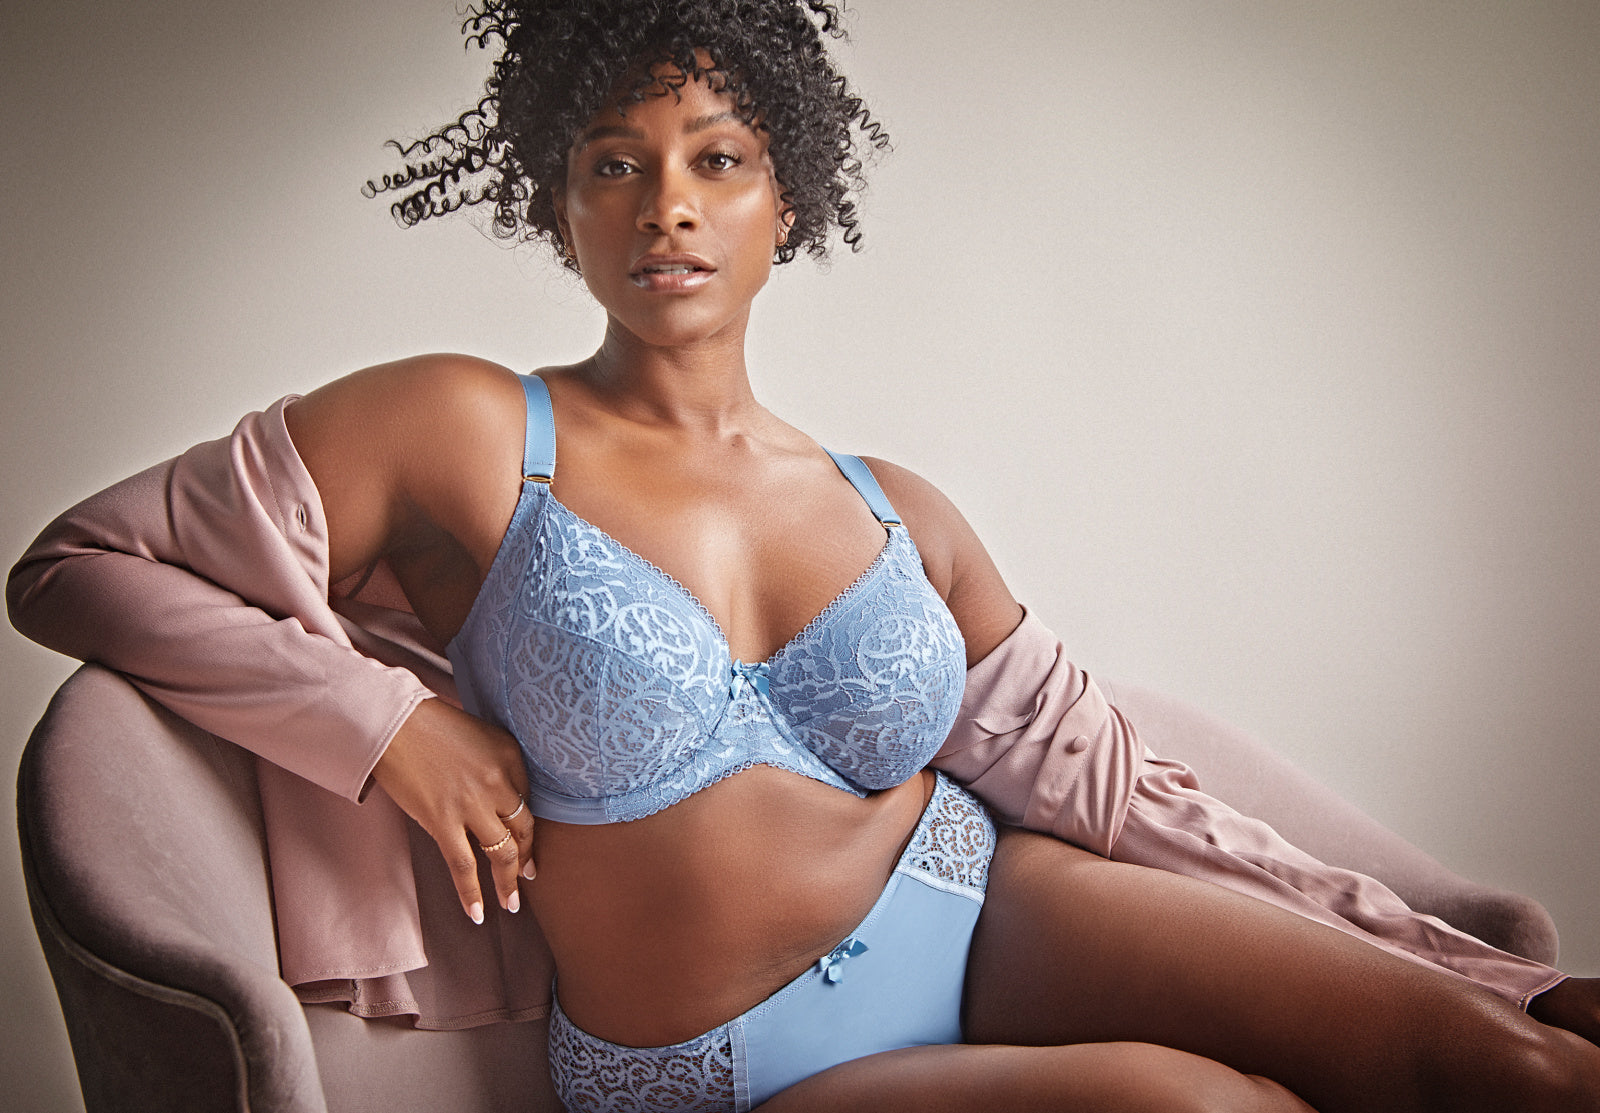 Elomi Charley UW Moulded Spacer Bra (DD-HH) – Lion's Lair Boutique